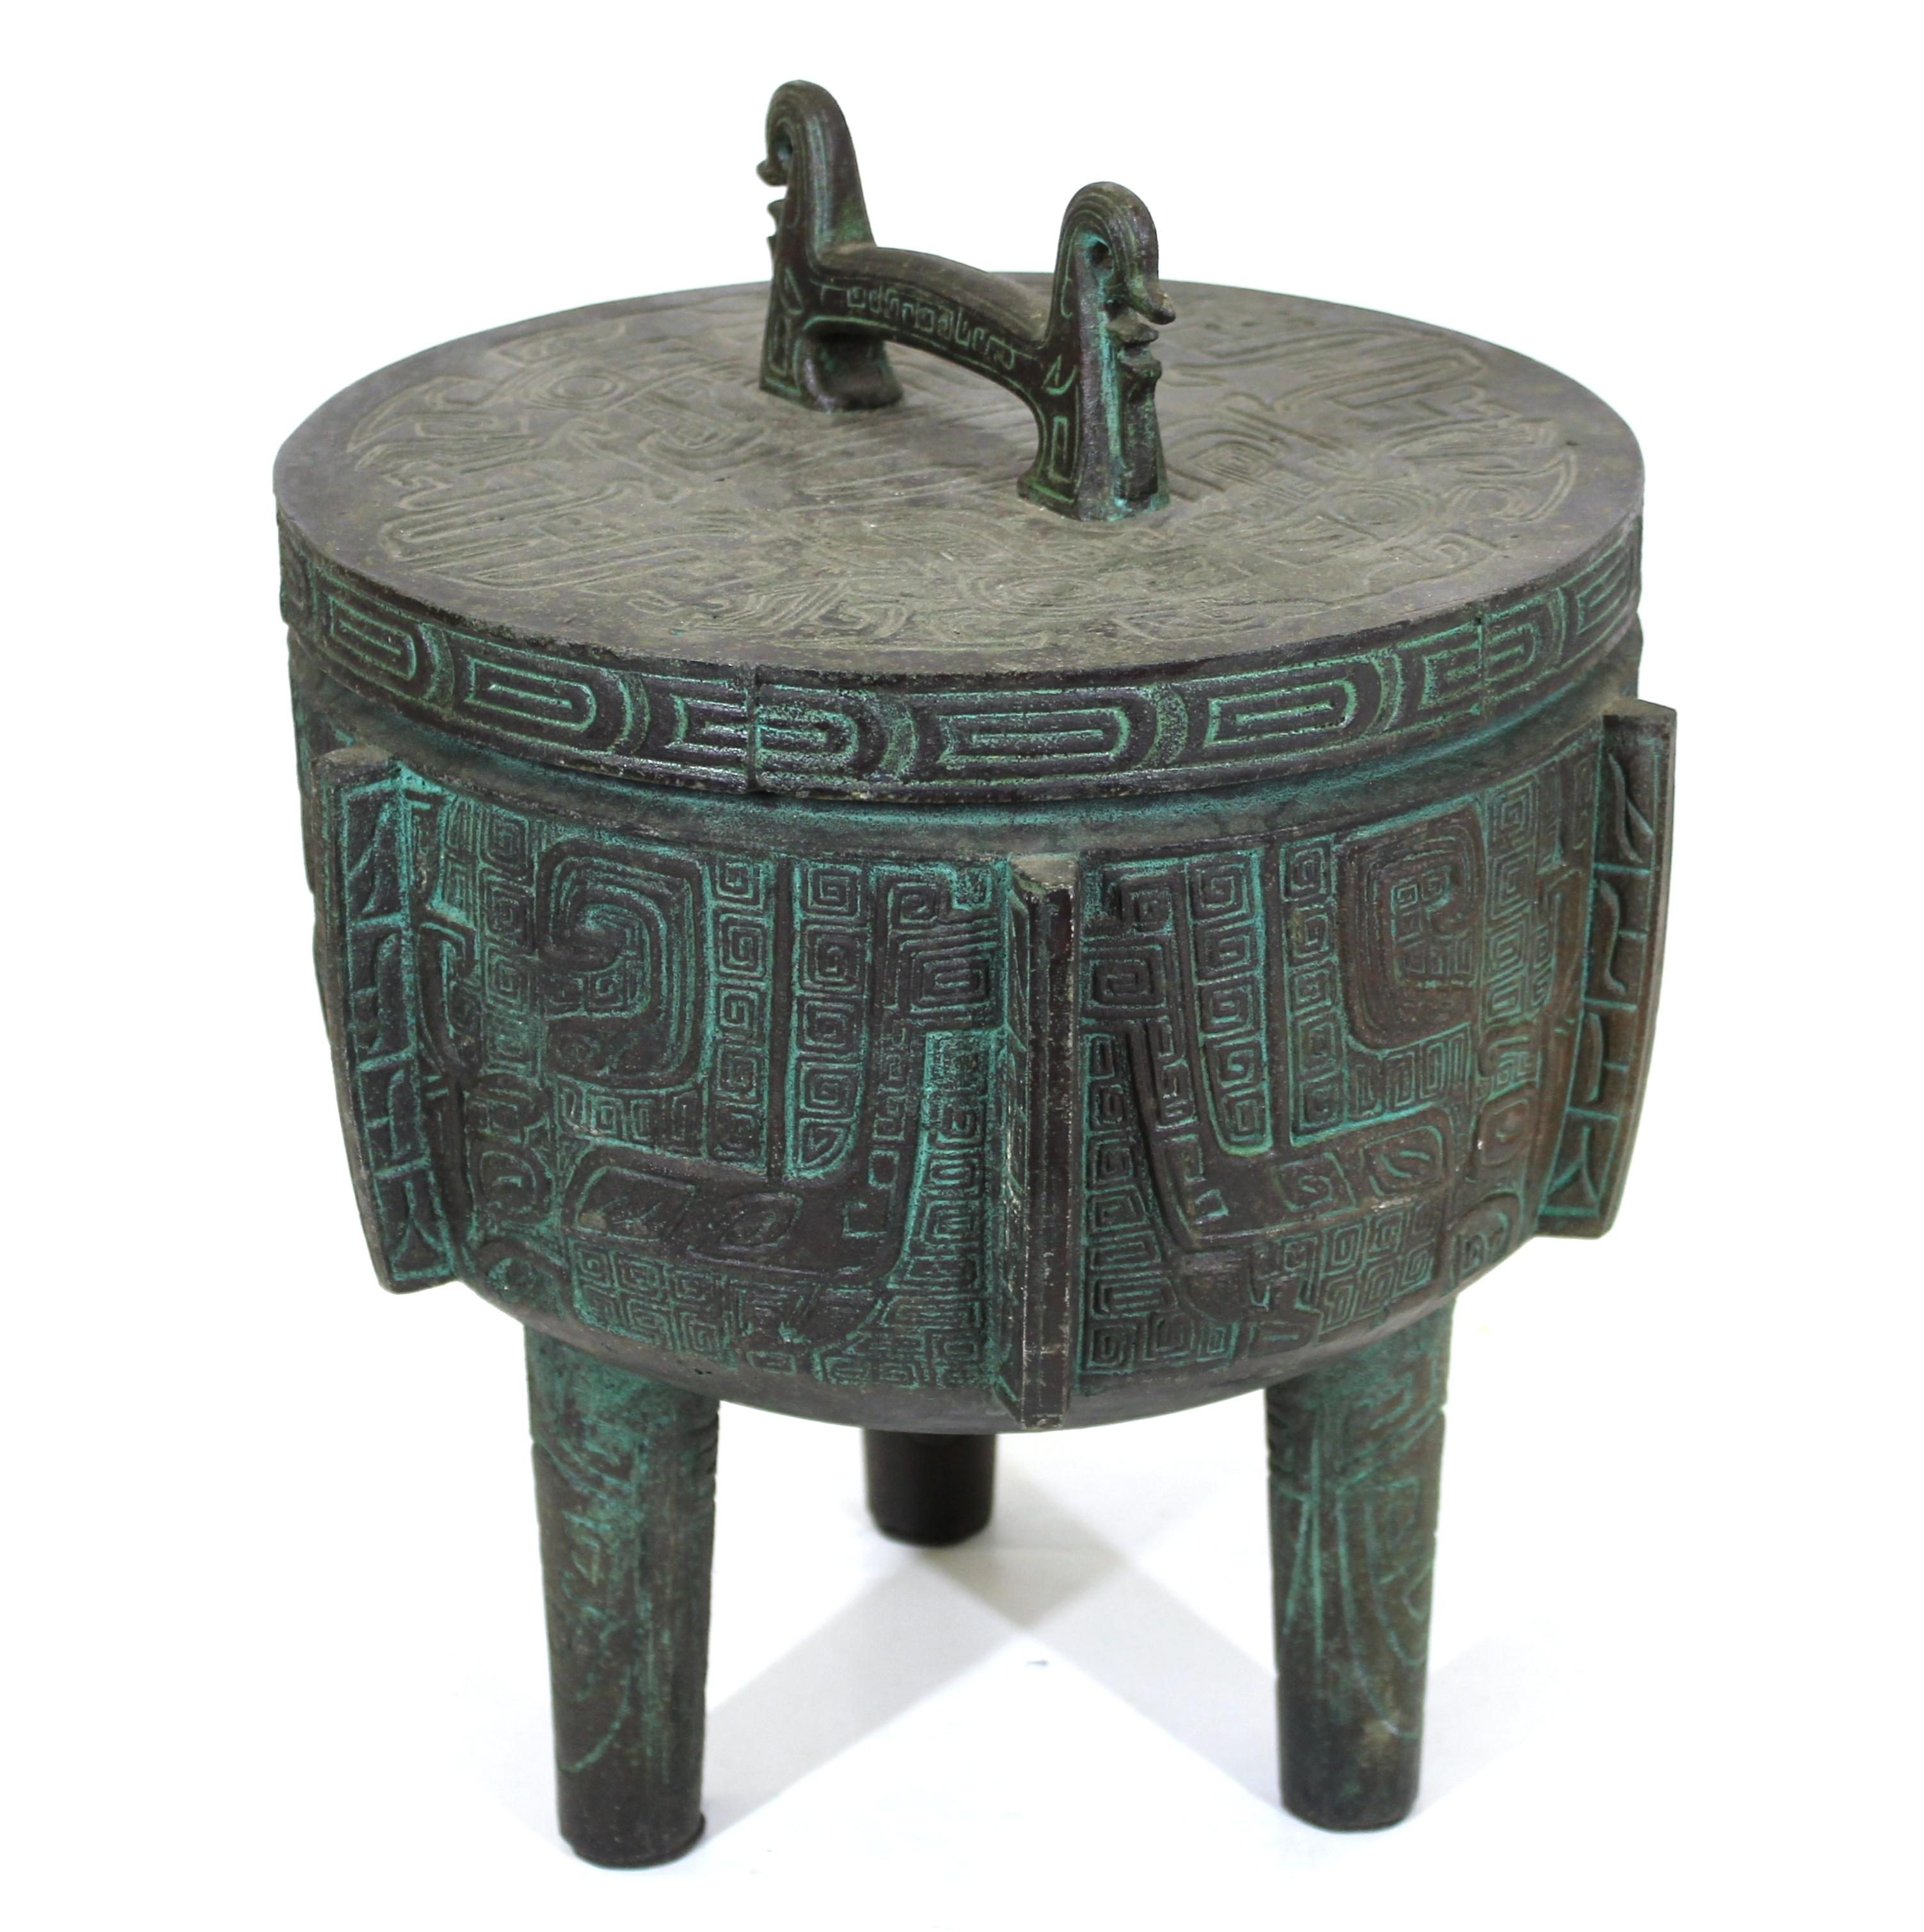 James Mont style Mid-Century Modern Asian Style ice bucket with bronze patina finish. Measures: 16